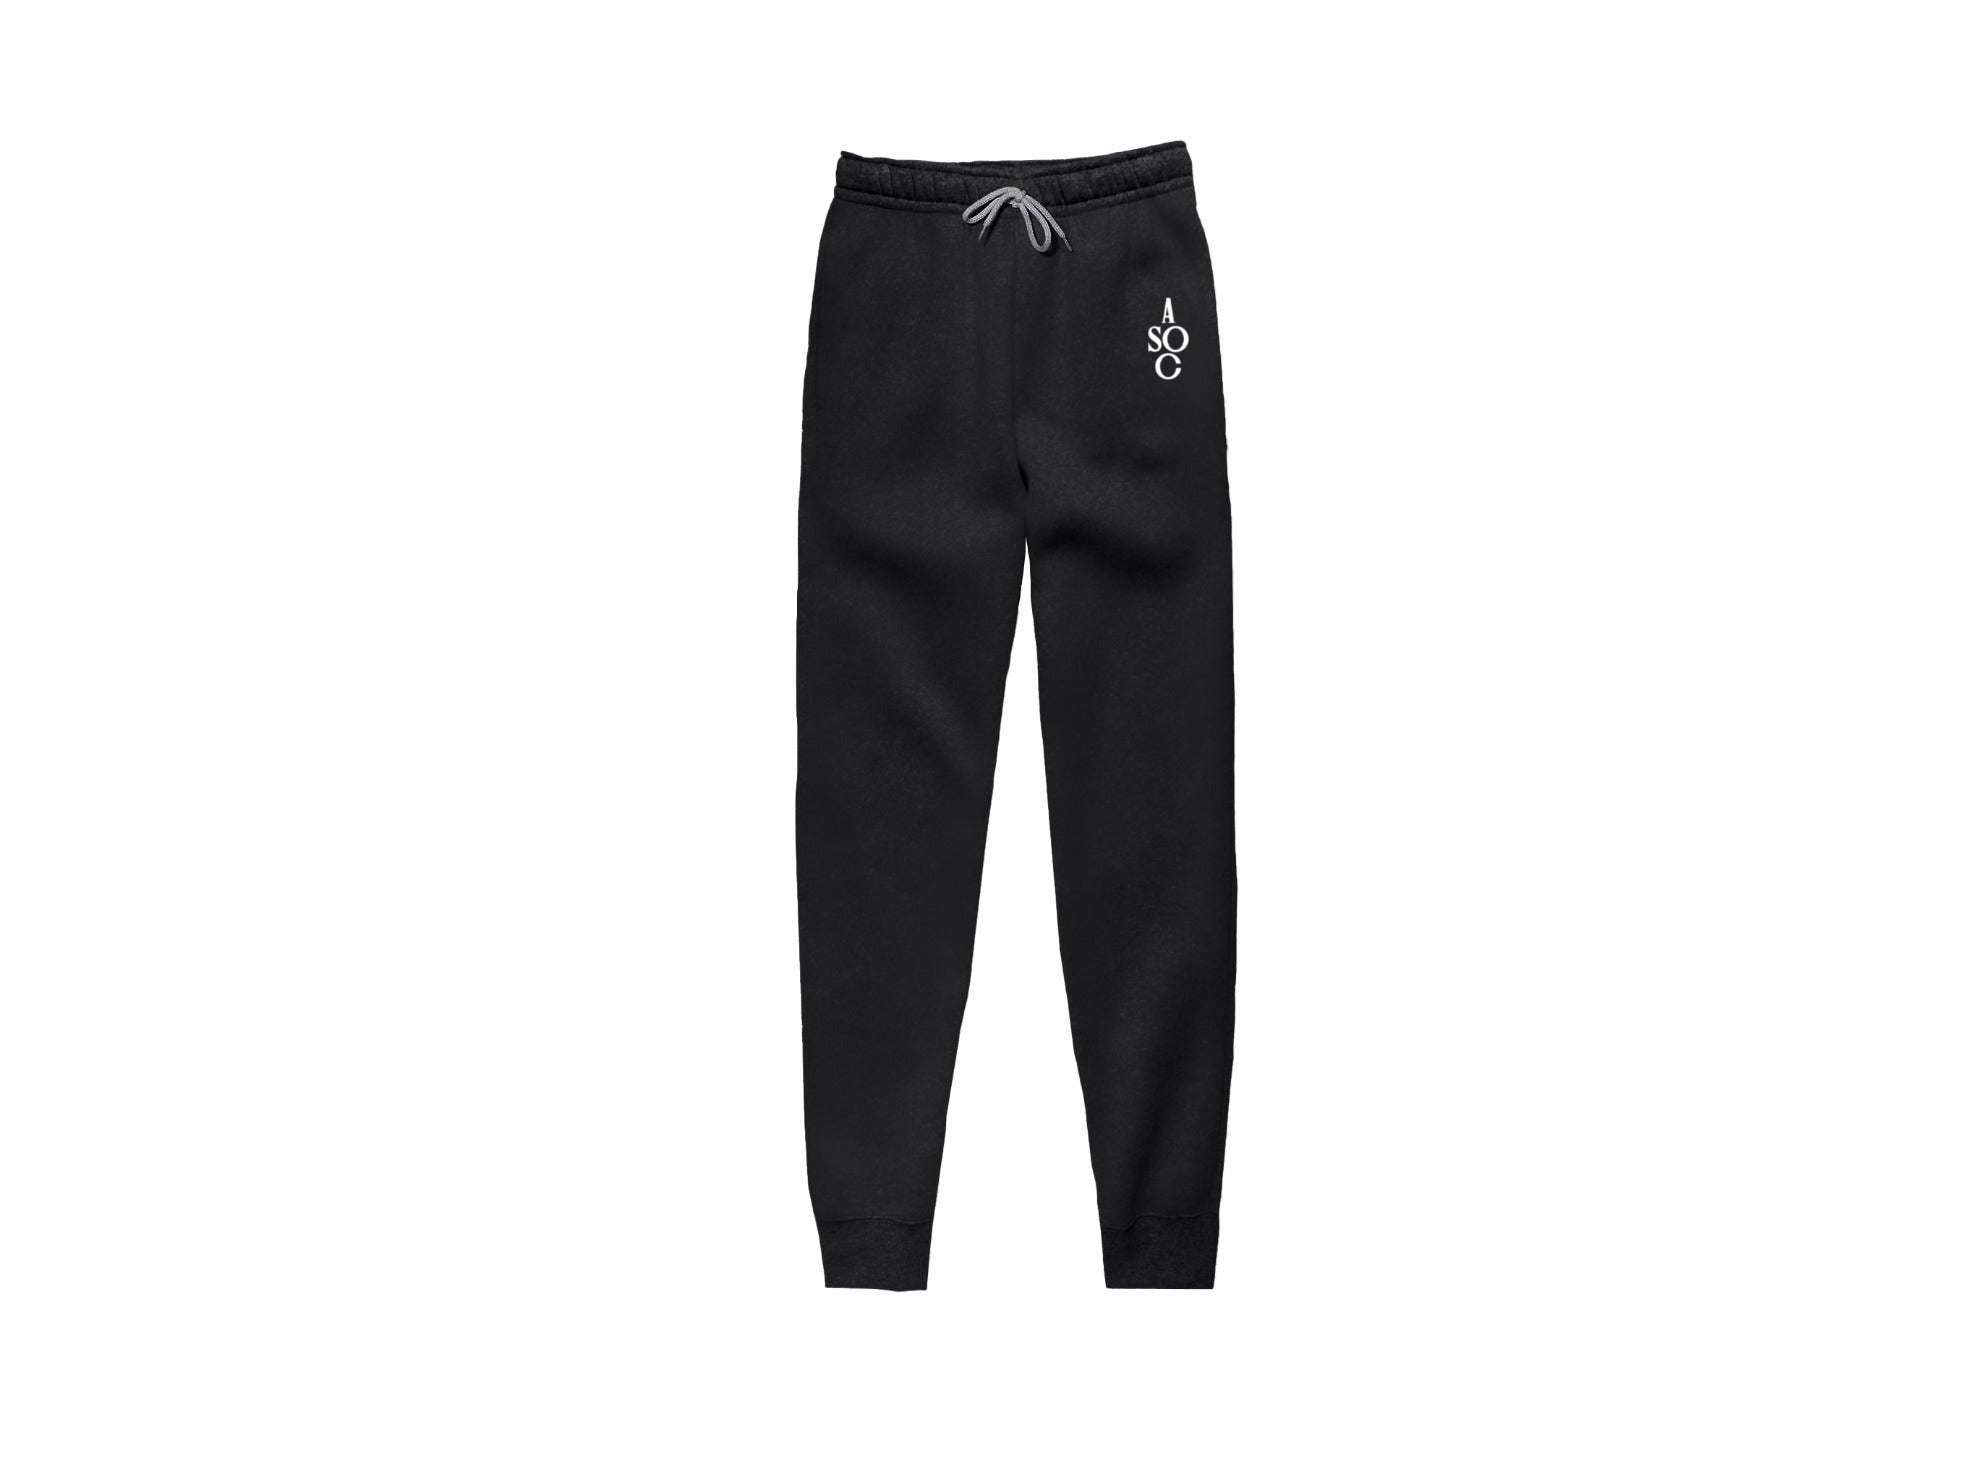 
  
  GREY STATE OF CALM COZY JOGGER BOTTOMS Unisex
  
